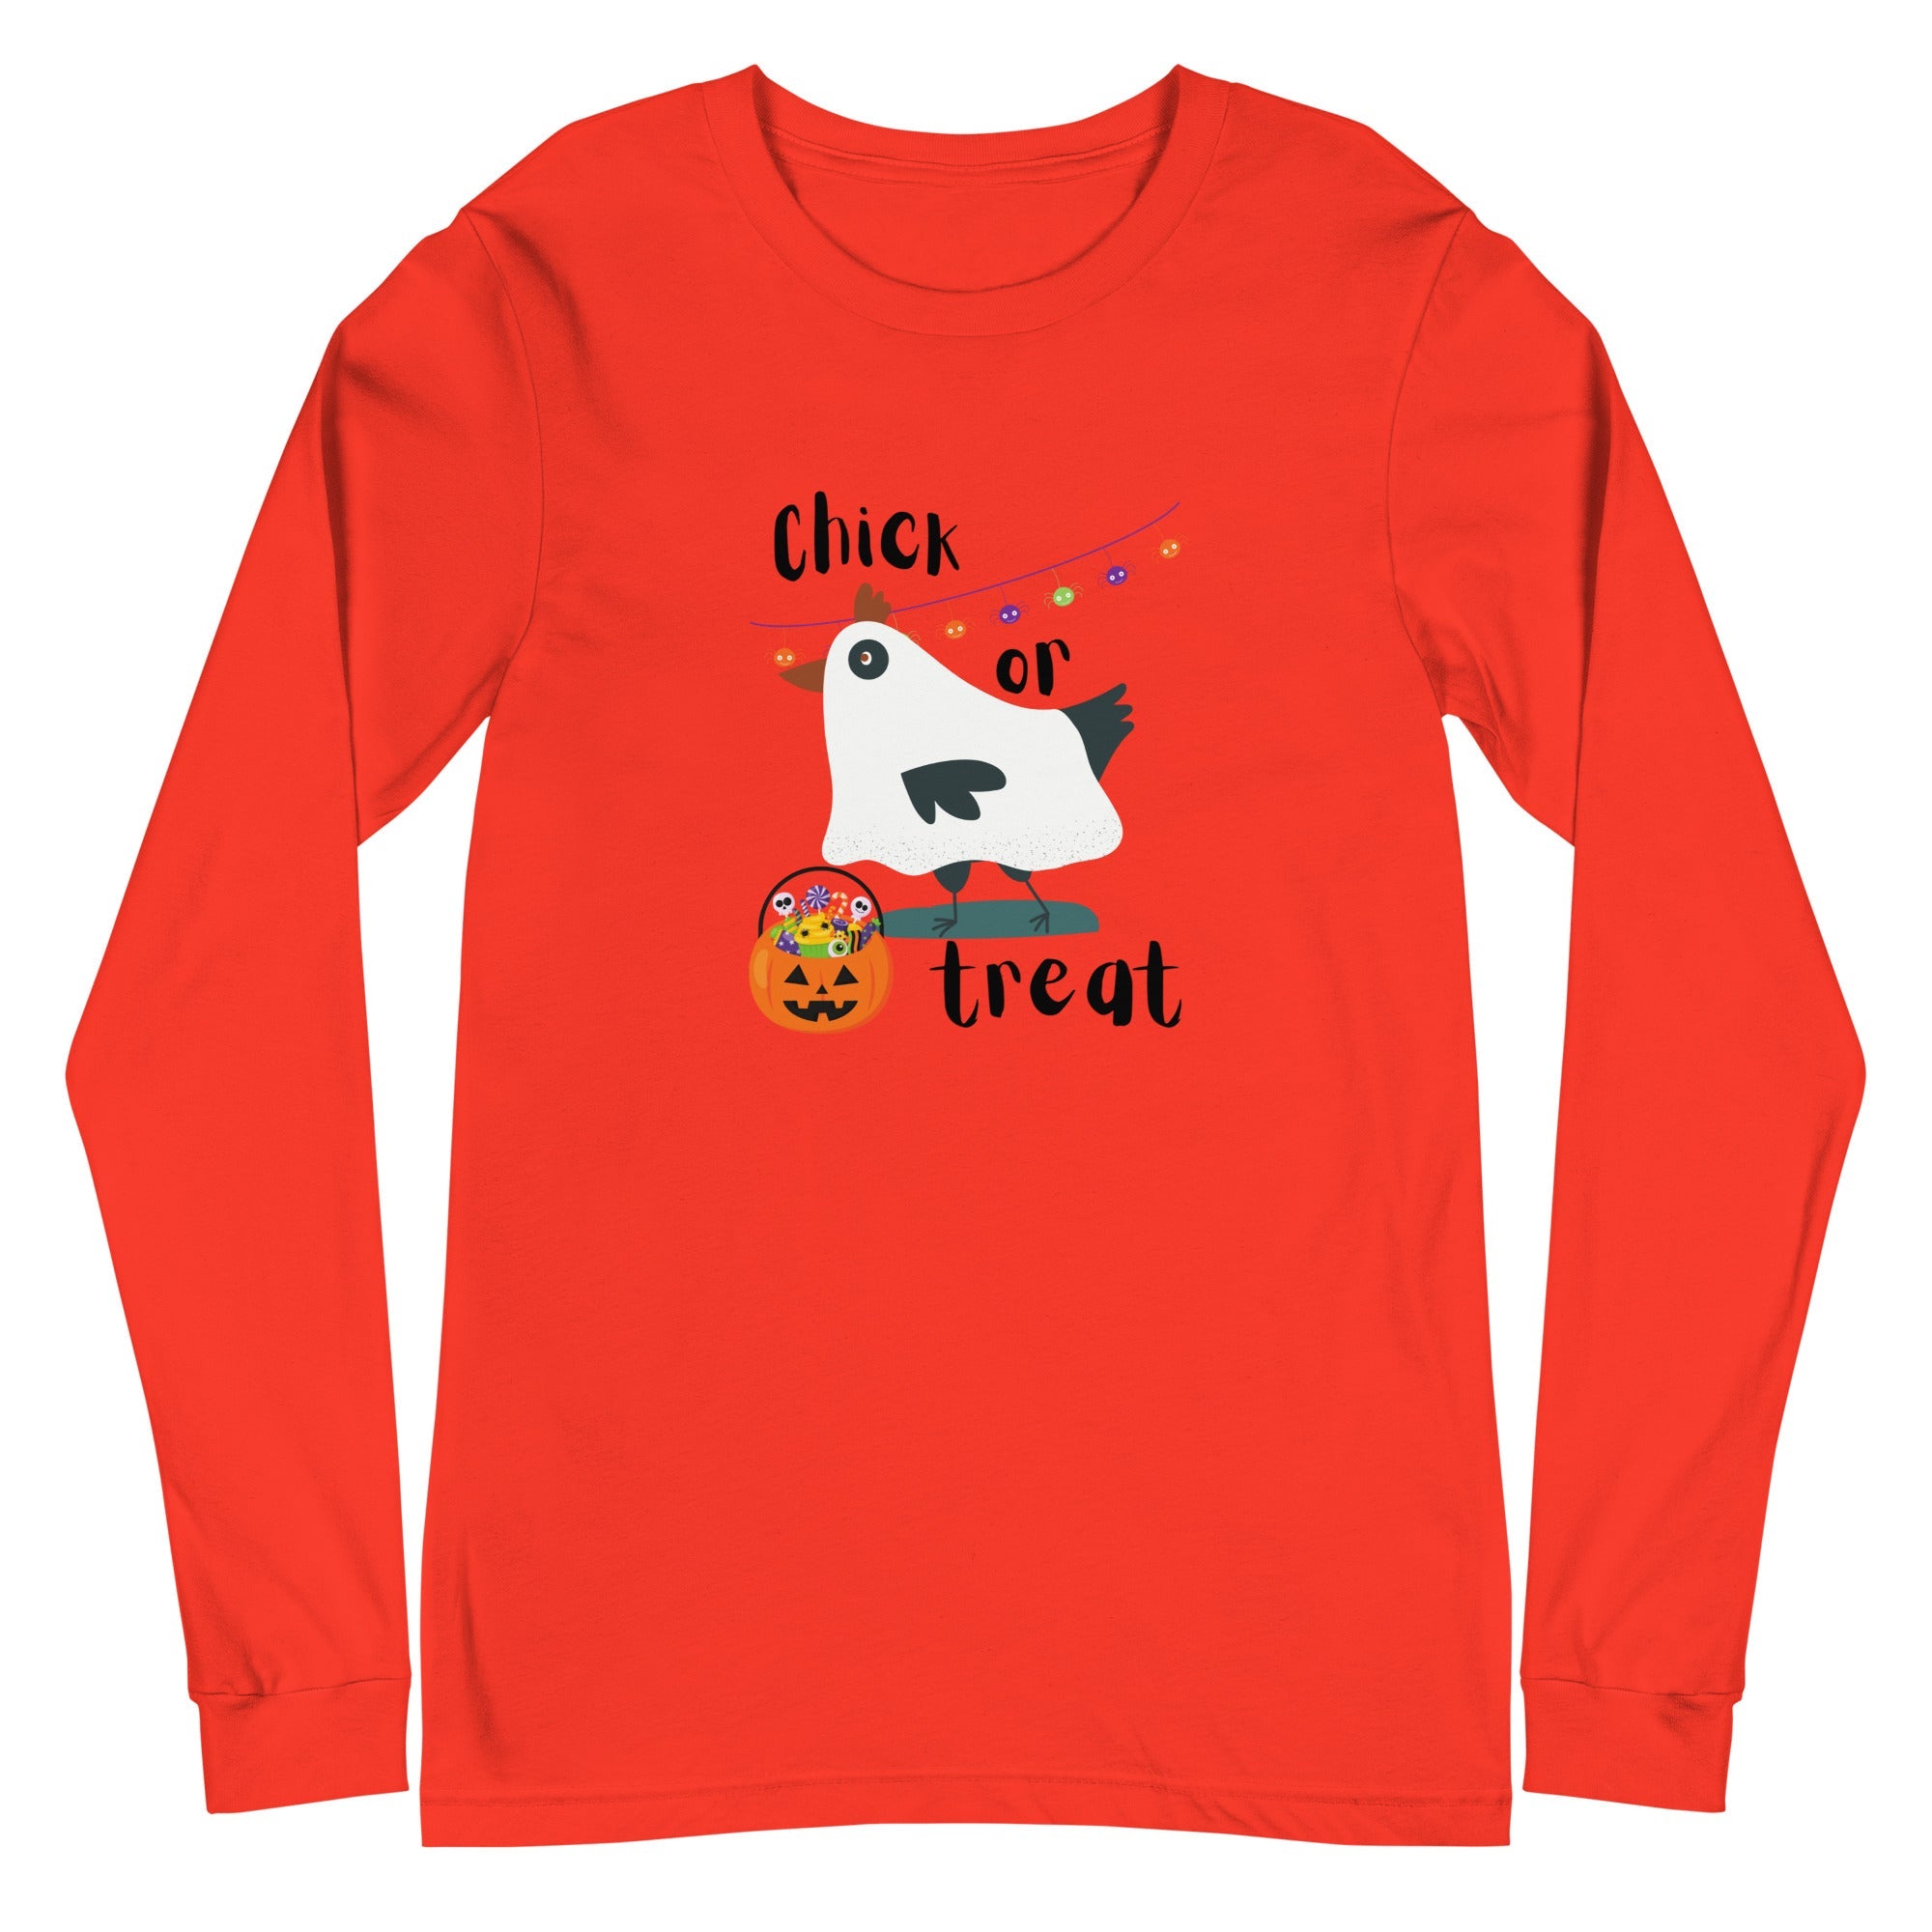 Chick or Treat Adult Unisex Long Sleeve Tee - Cluck It All Farms